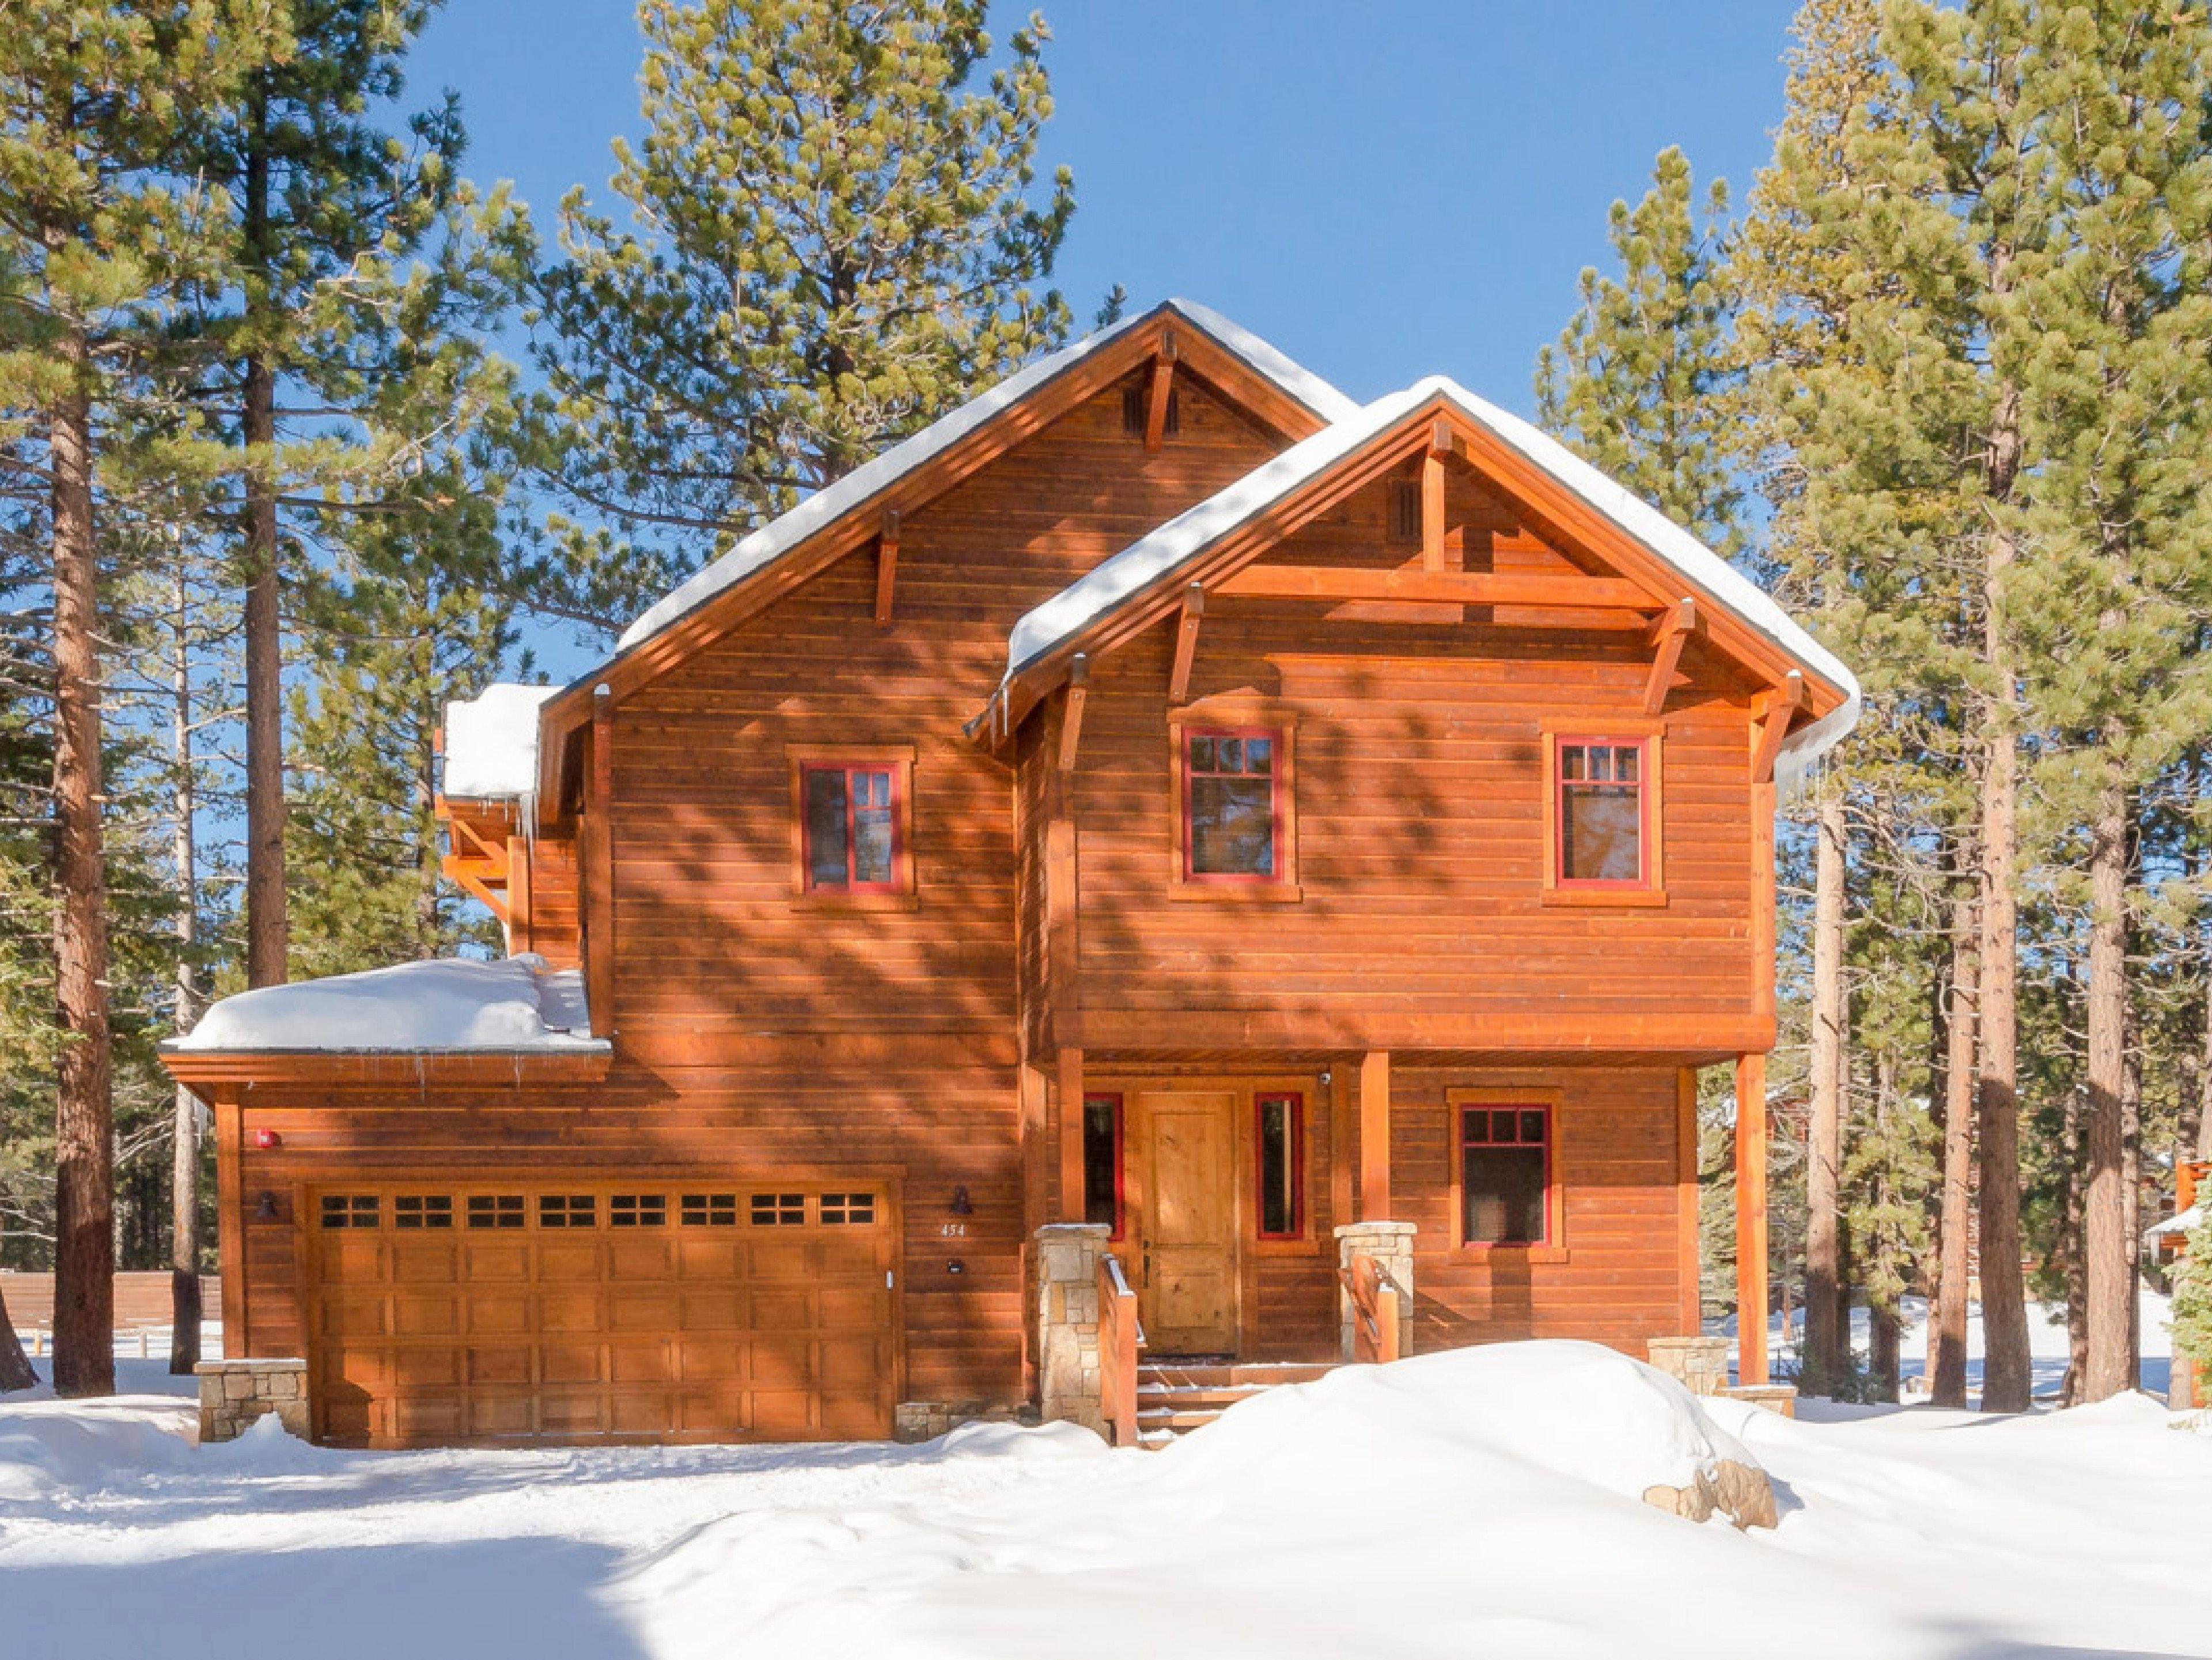 Mammoth Lakes 2 cabin rentals for the festive season